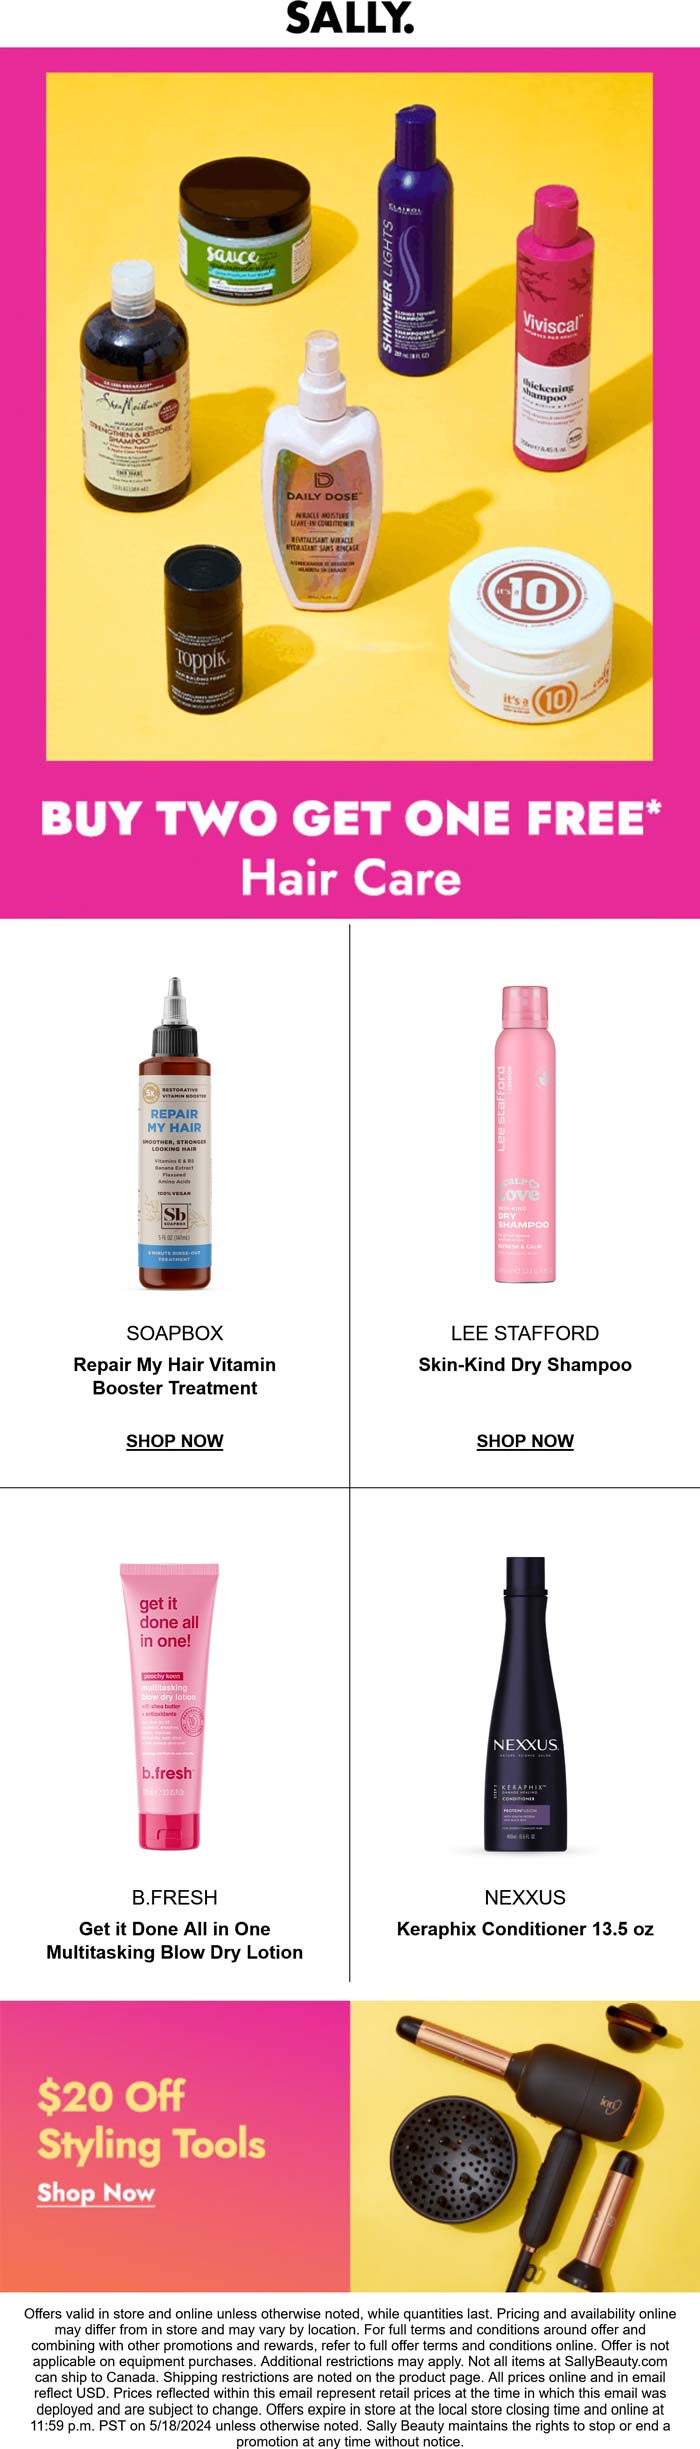 Sally stores Coupon  3rd hair care item free & $20 off styling tools today at Sally beauty #sally 